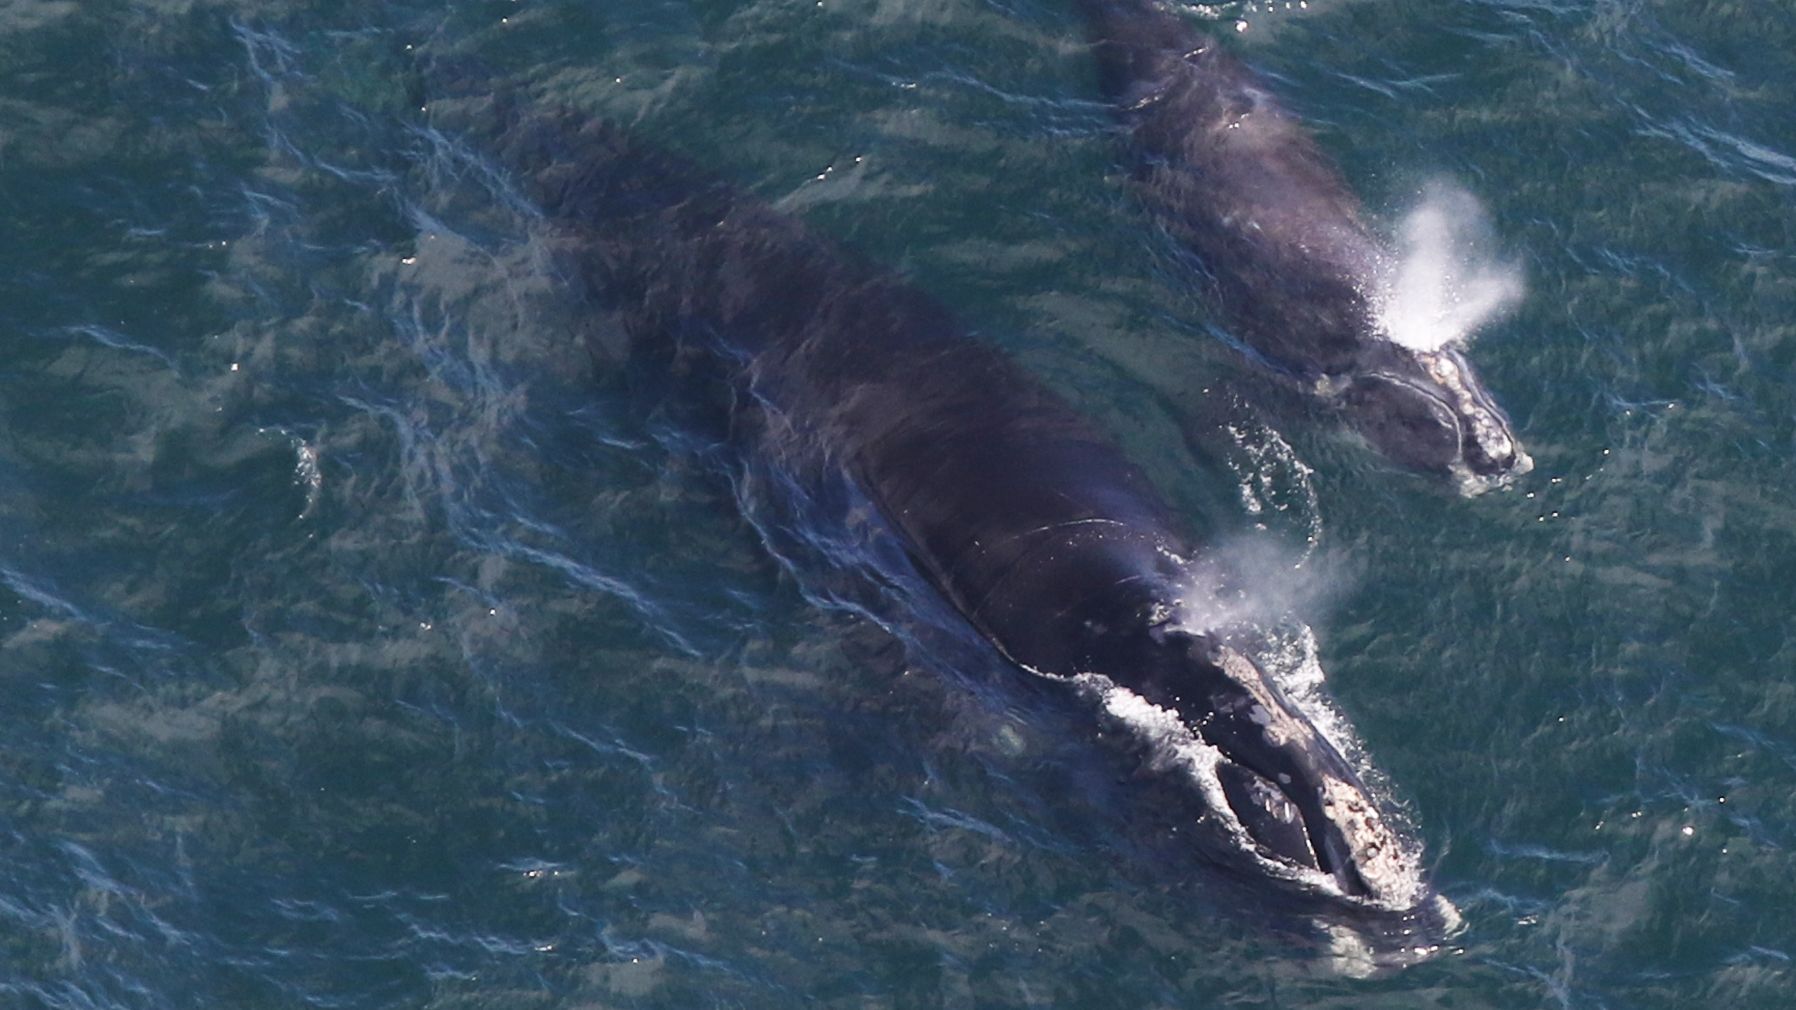 North Atlantic right whale EgNo 4180 and her calf are photographed by the Center for Coastal Studies' aerial survey team as they swim in Cape Cod Bay on April 11, 2019.